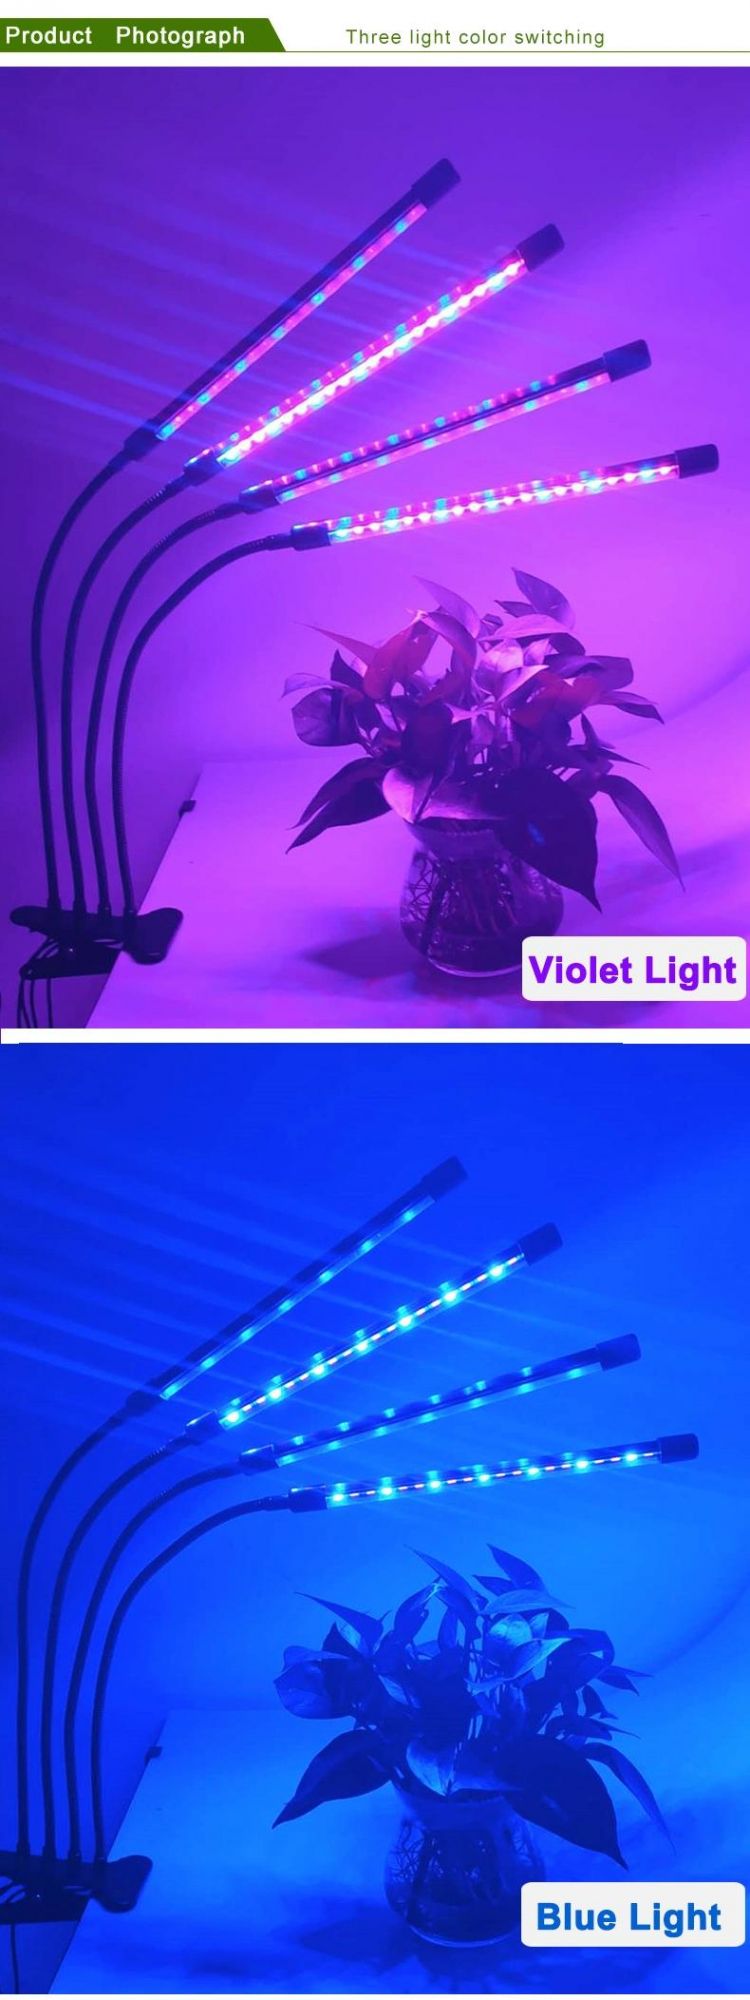 Hot Sell LED Plants20W LED Tripod Plant Light Four Round Tube LED Grow Lights for Indoor Plants